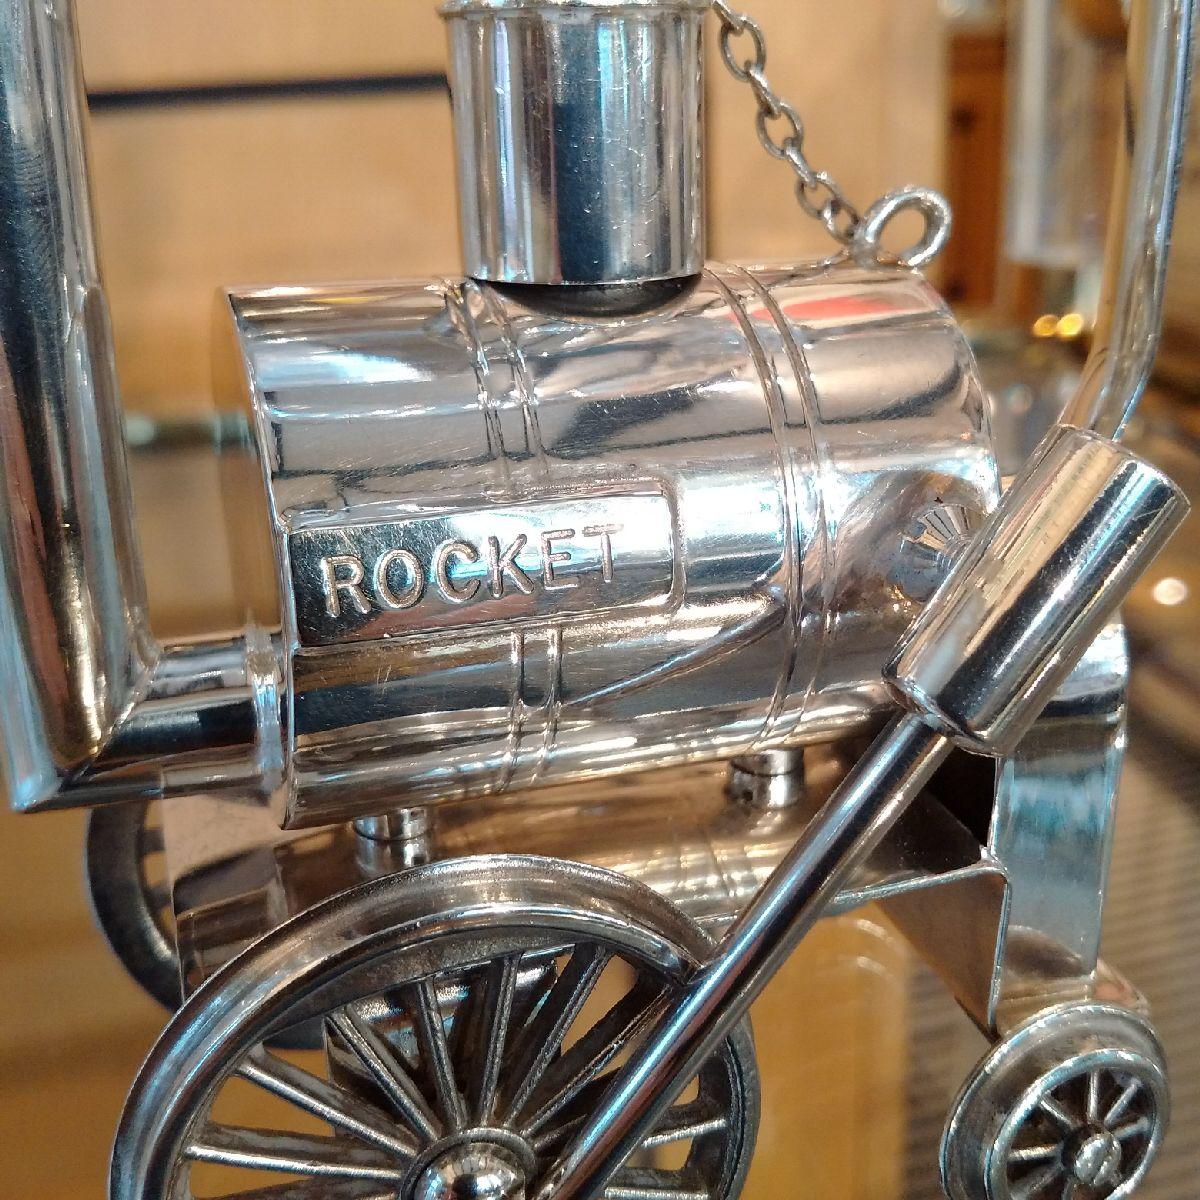 P H Vogel and Co, Birmingham

A highly unusual and amusing, silver plated brandy warmer in the form of Stephenson’s Rocket, the frame for the glass sitting over the ‘boiler’ with engraved ‘ROCKET’ to the side, which contains the fuel, and a wick,